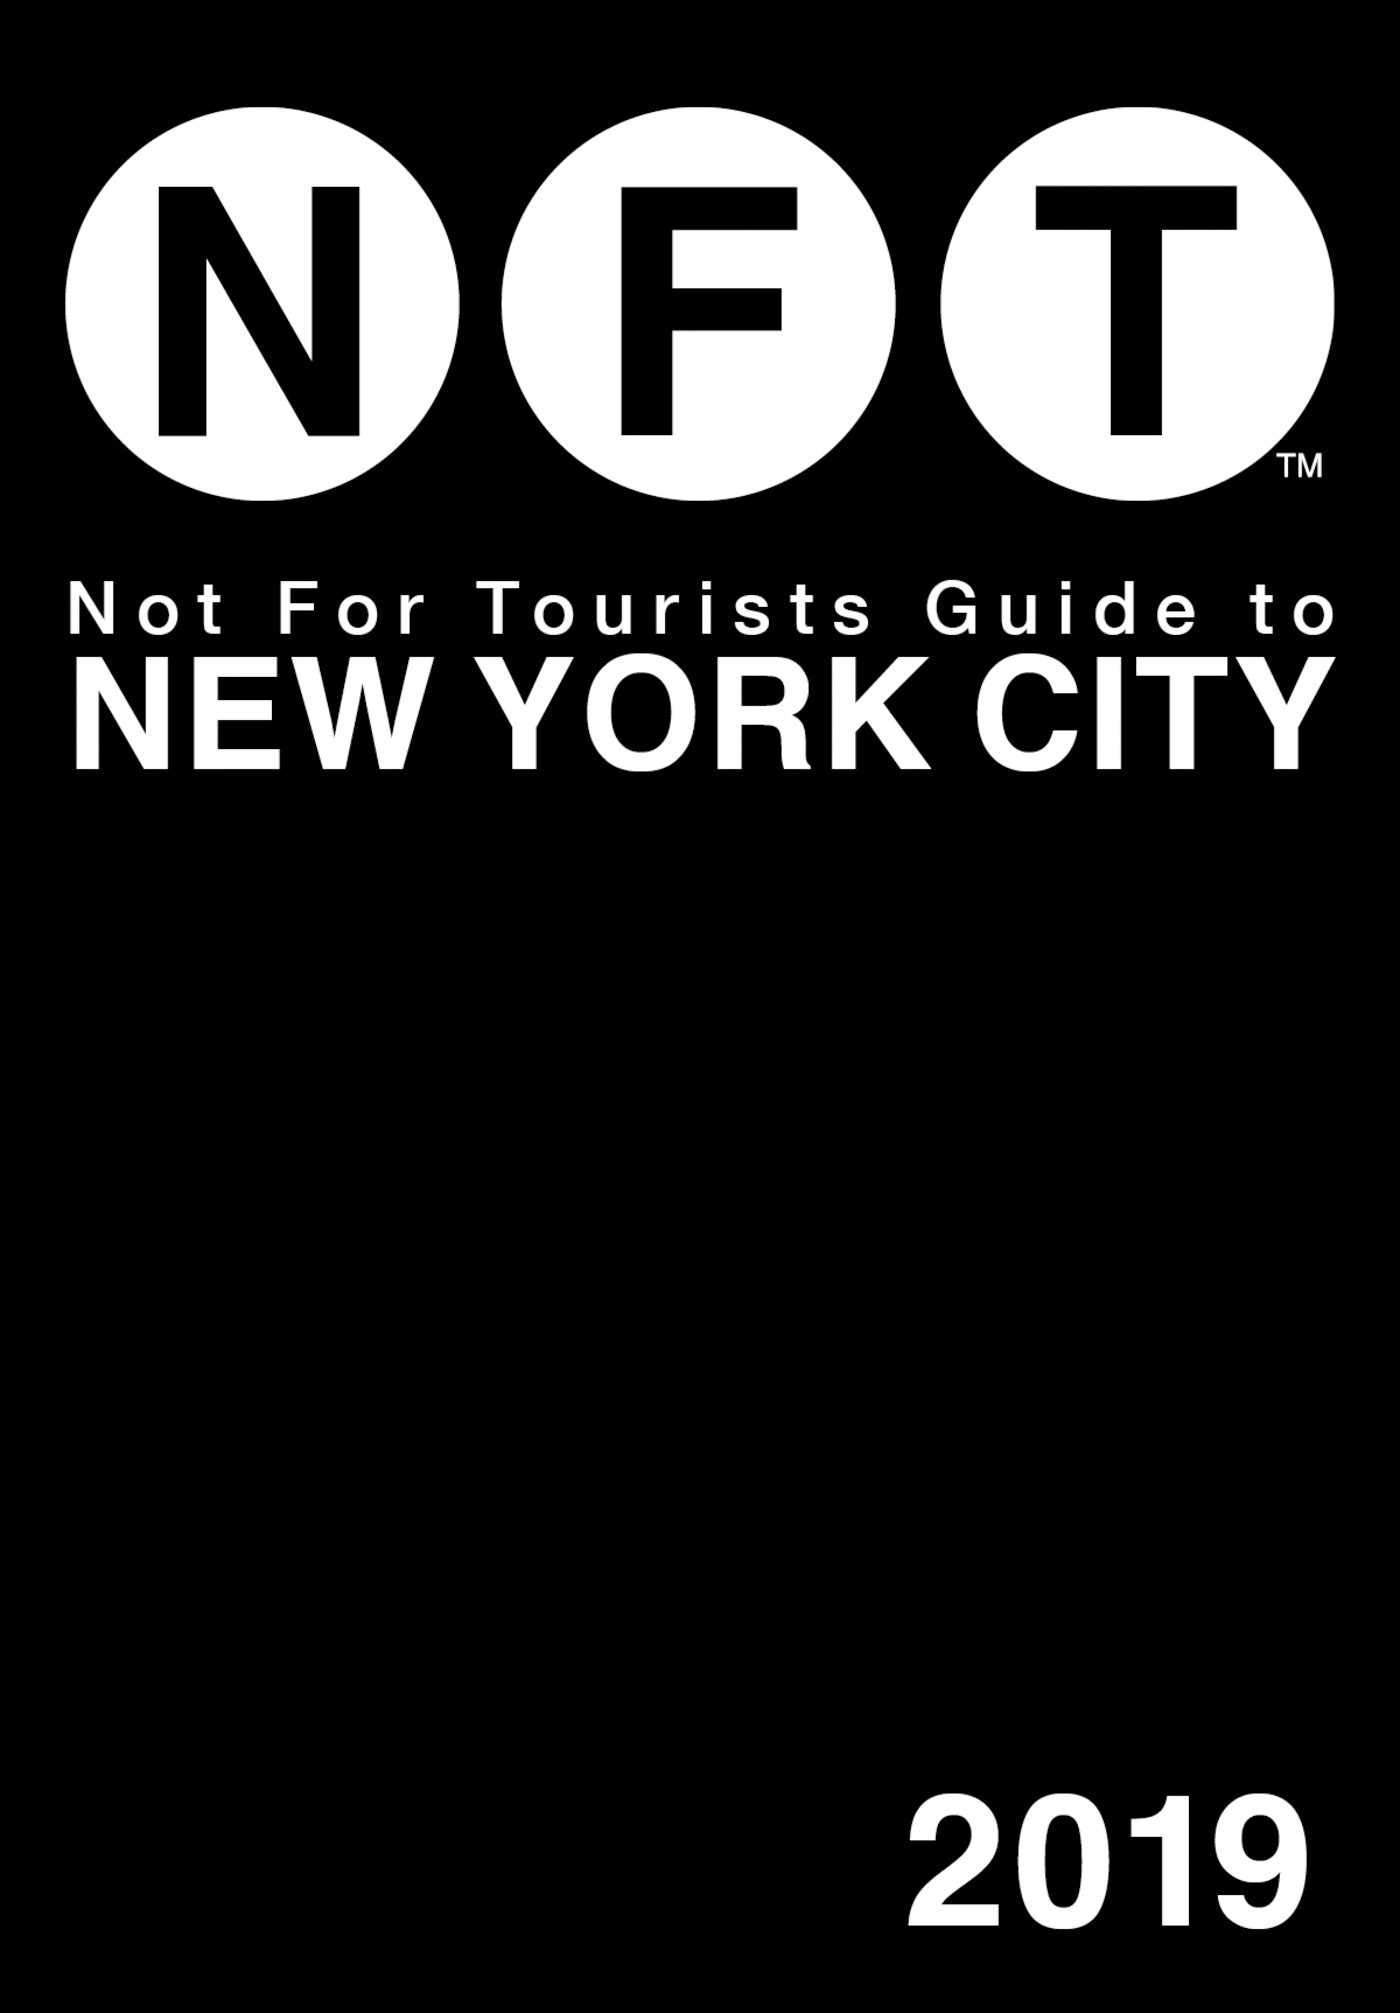 Not For Tourists Guide to New York City 2019